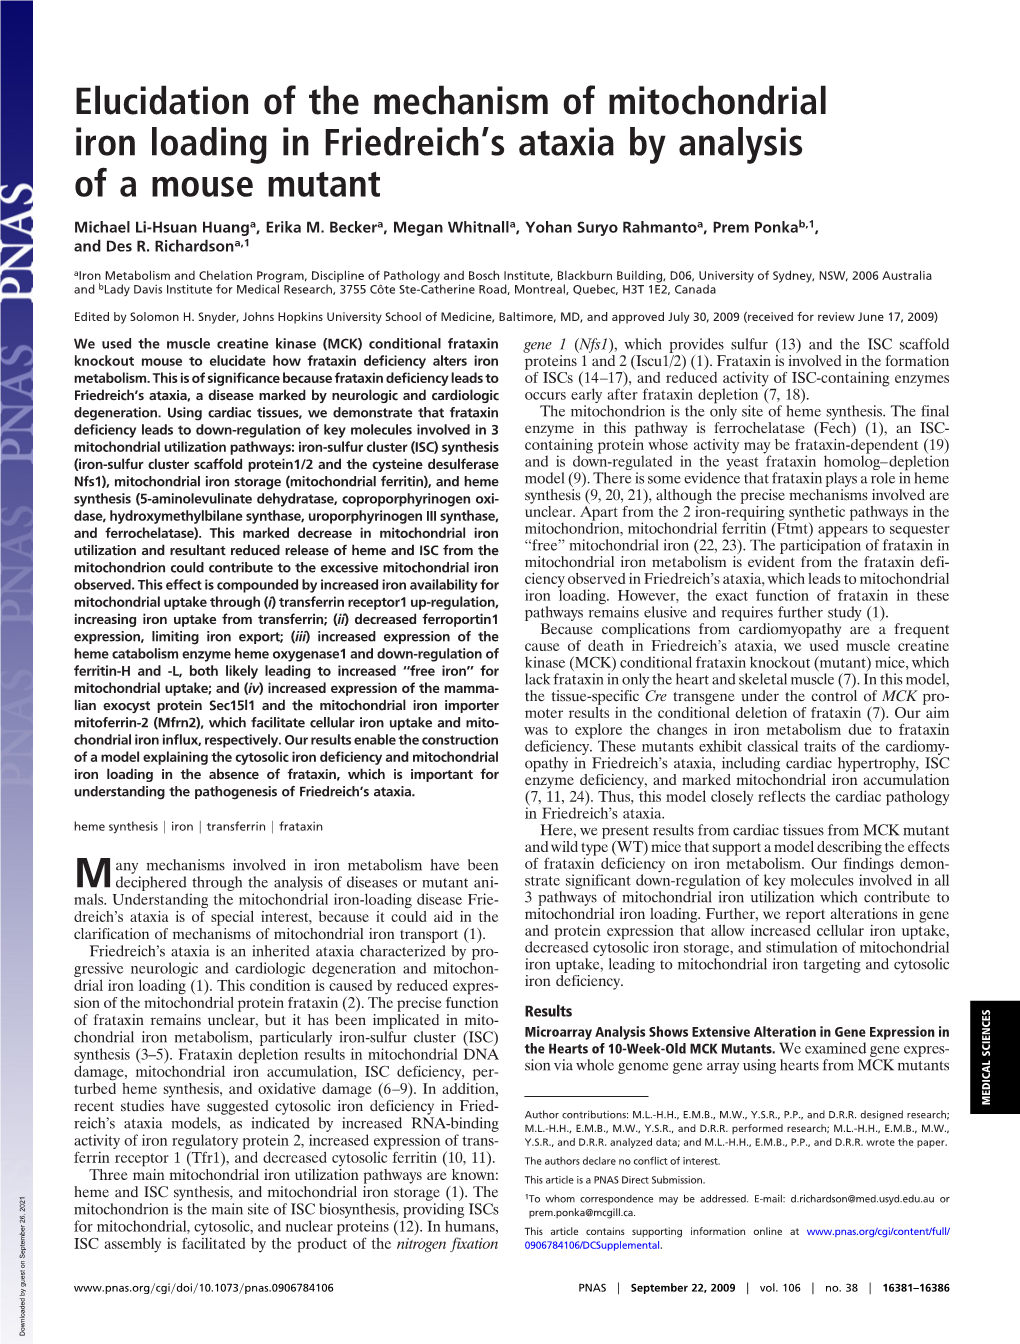 Elucidation of the Mechanism of Mitochondrial Iron Loading in Friedreich’S Ataxia by Analysis of a Mouse Mutant